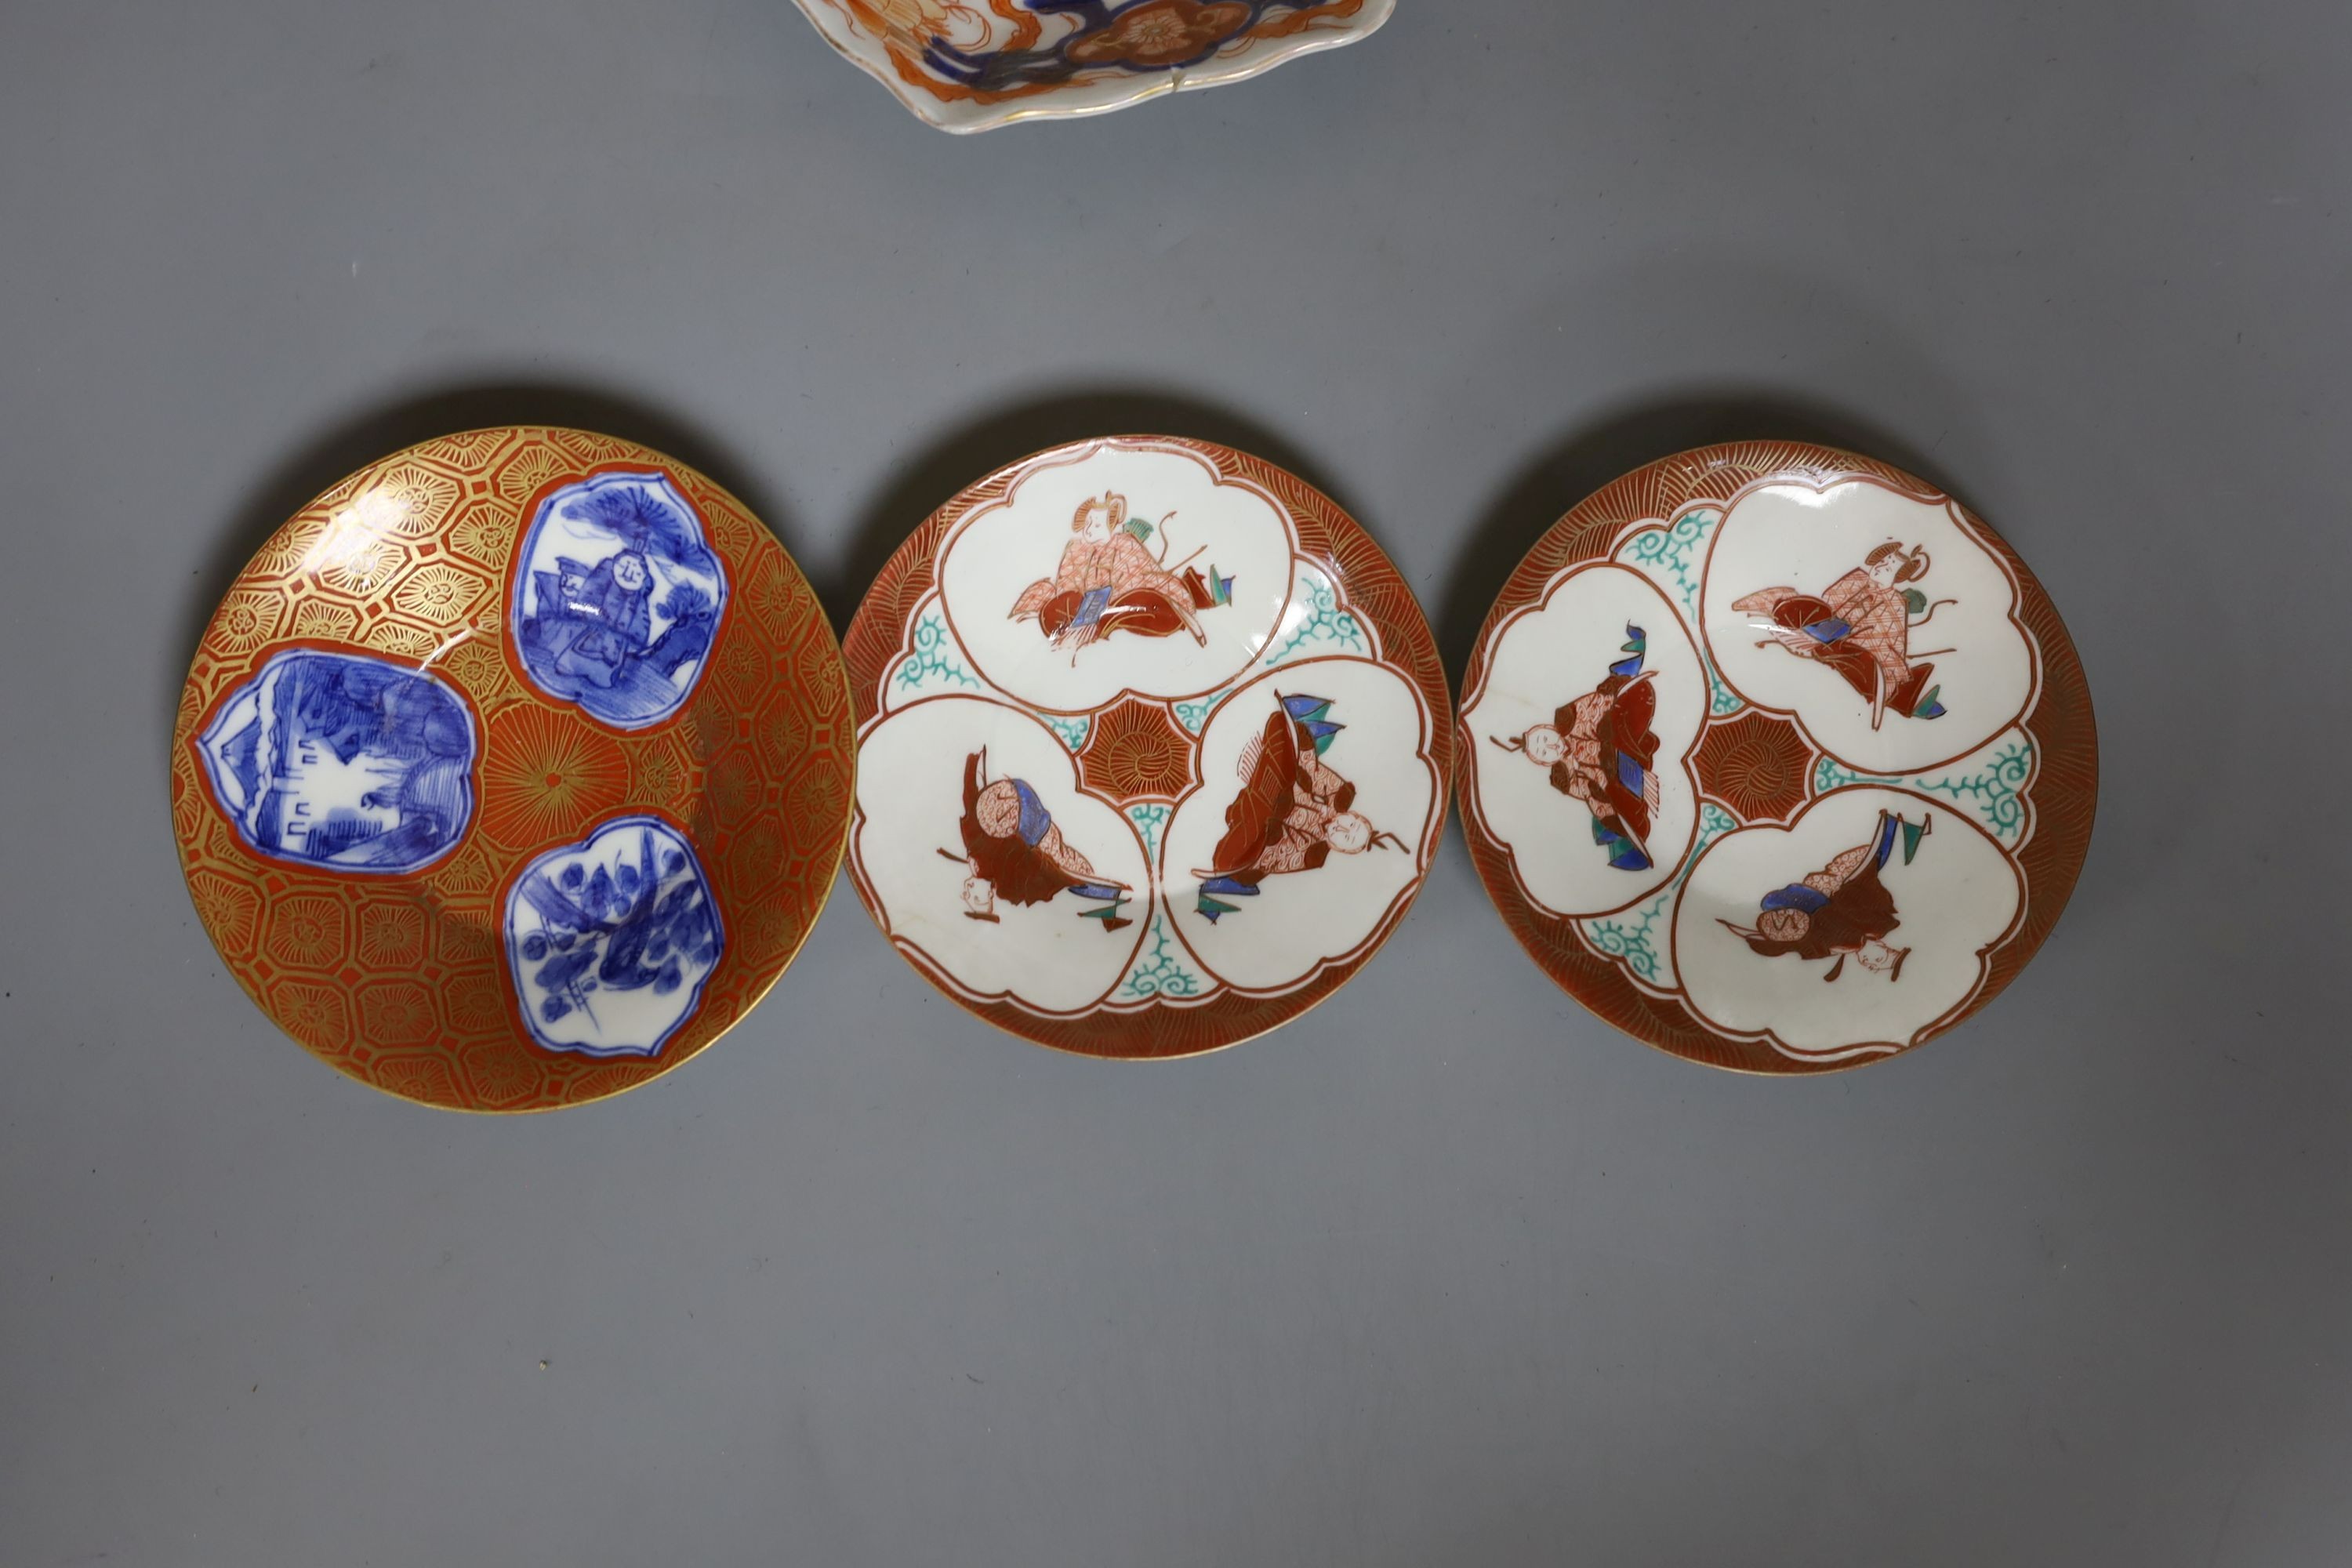 A selection of Japanese ceramics, bronzes and cloisonné enamel wares - some Meiji period